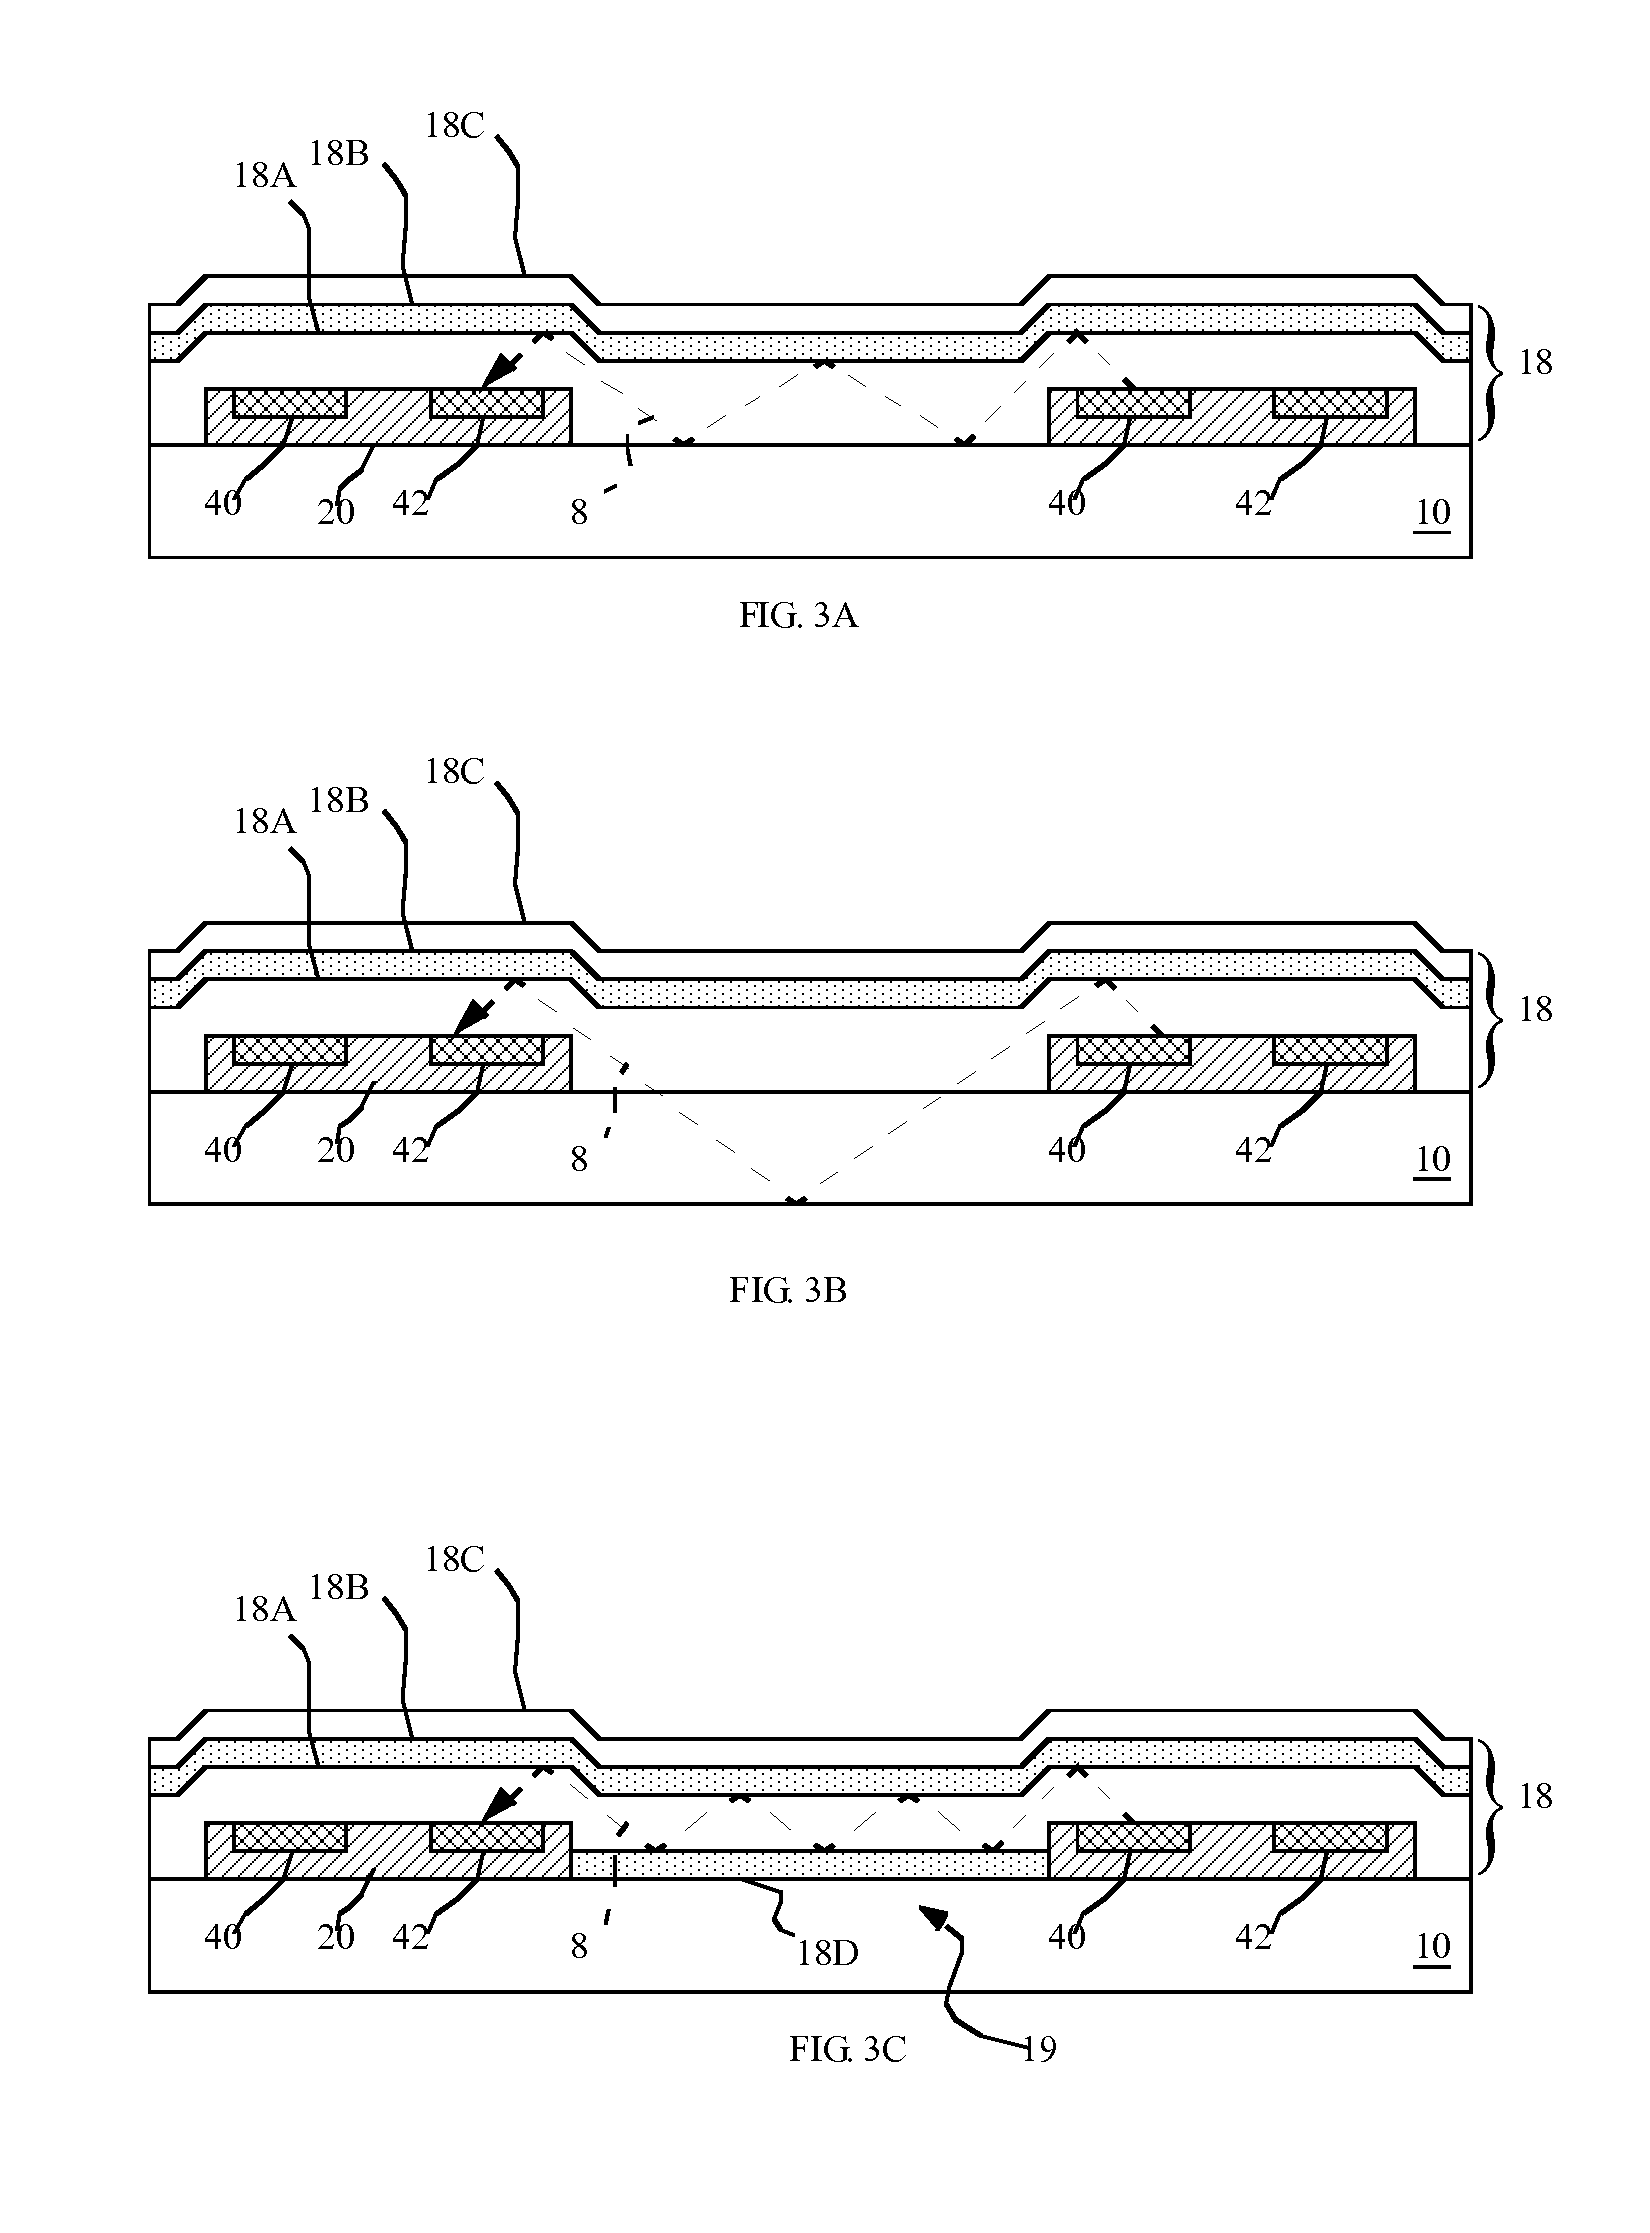 Electroluminescent display device with optically communicating chiplets